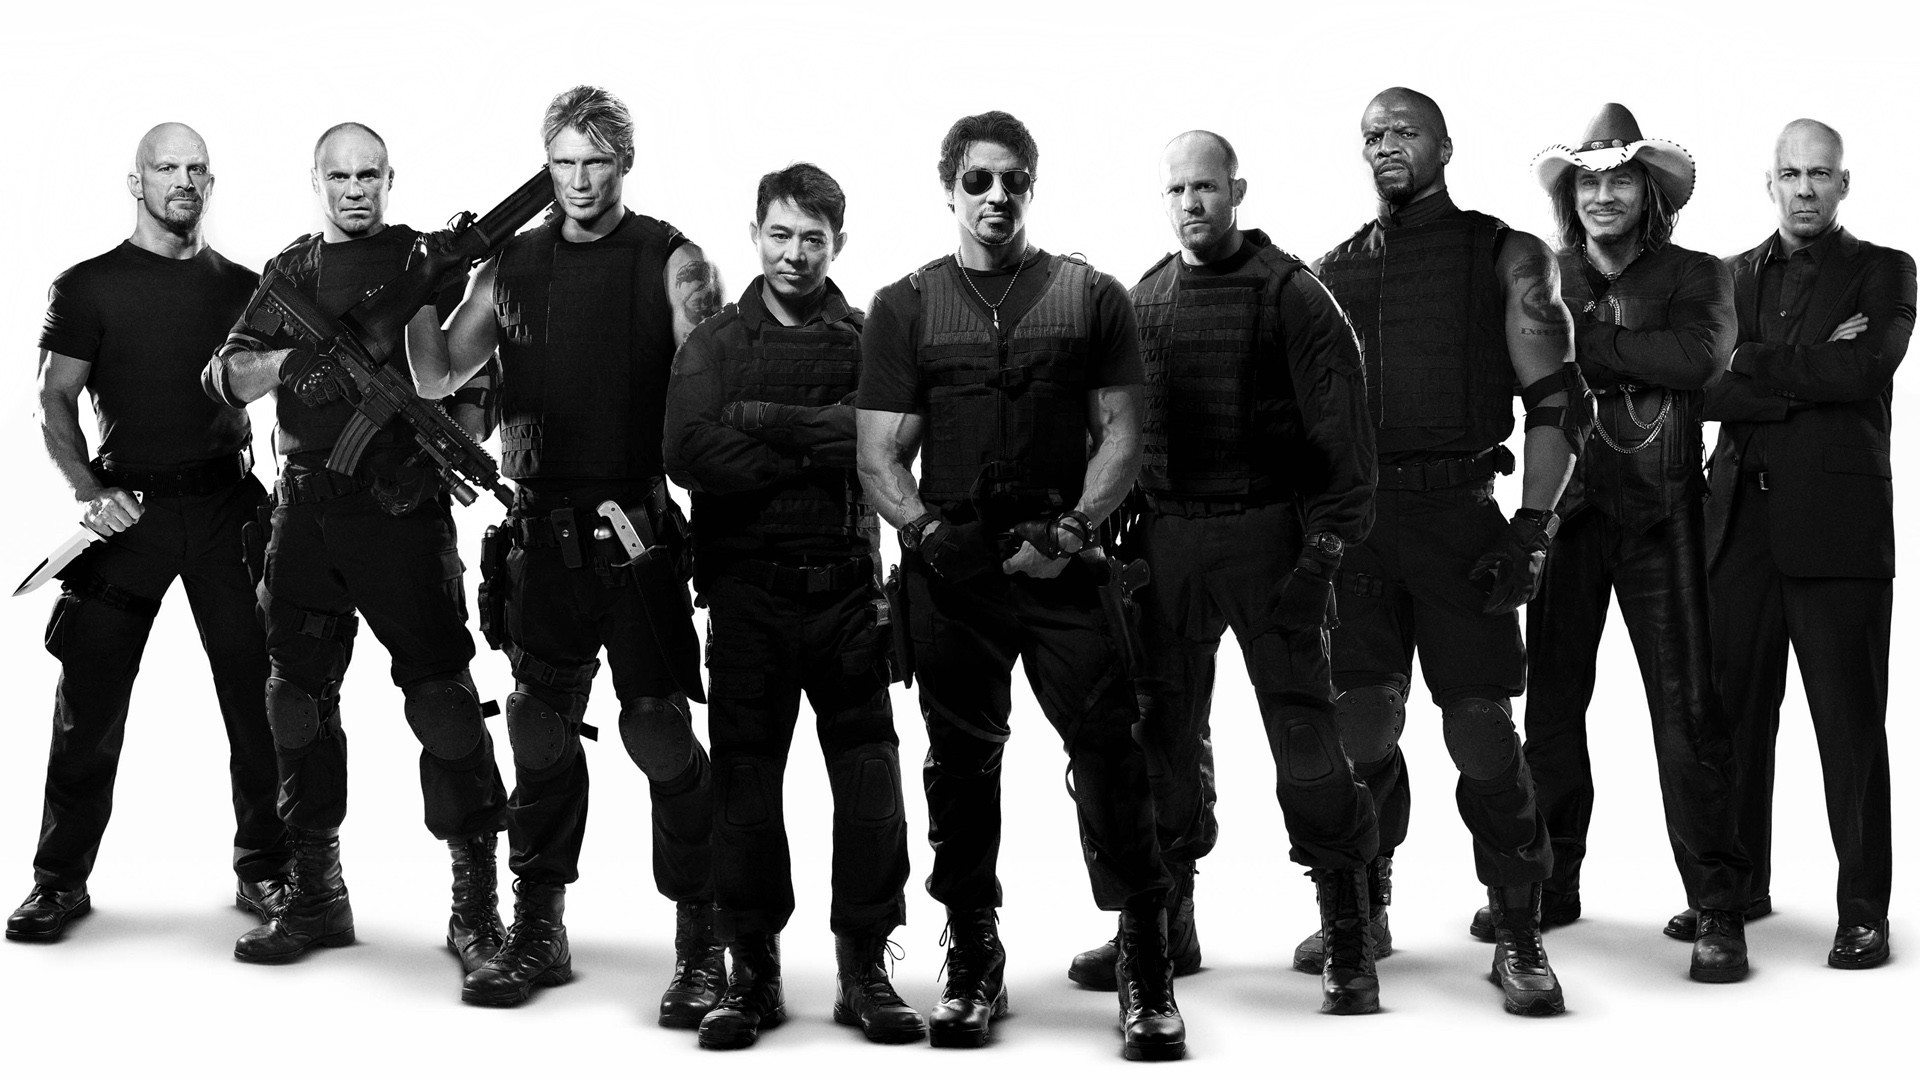 The Expendables Art